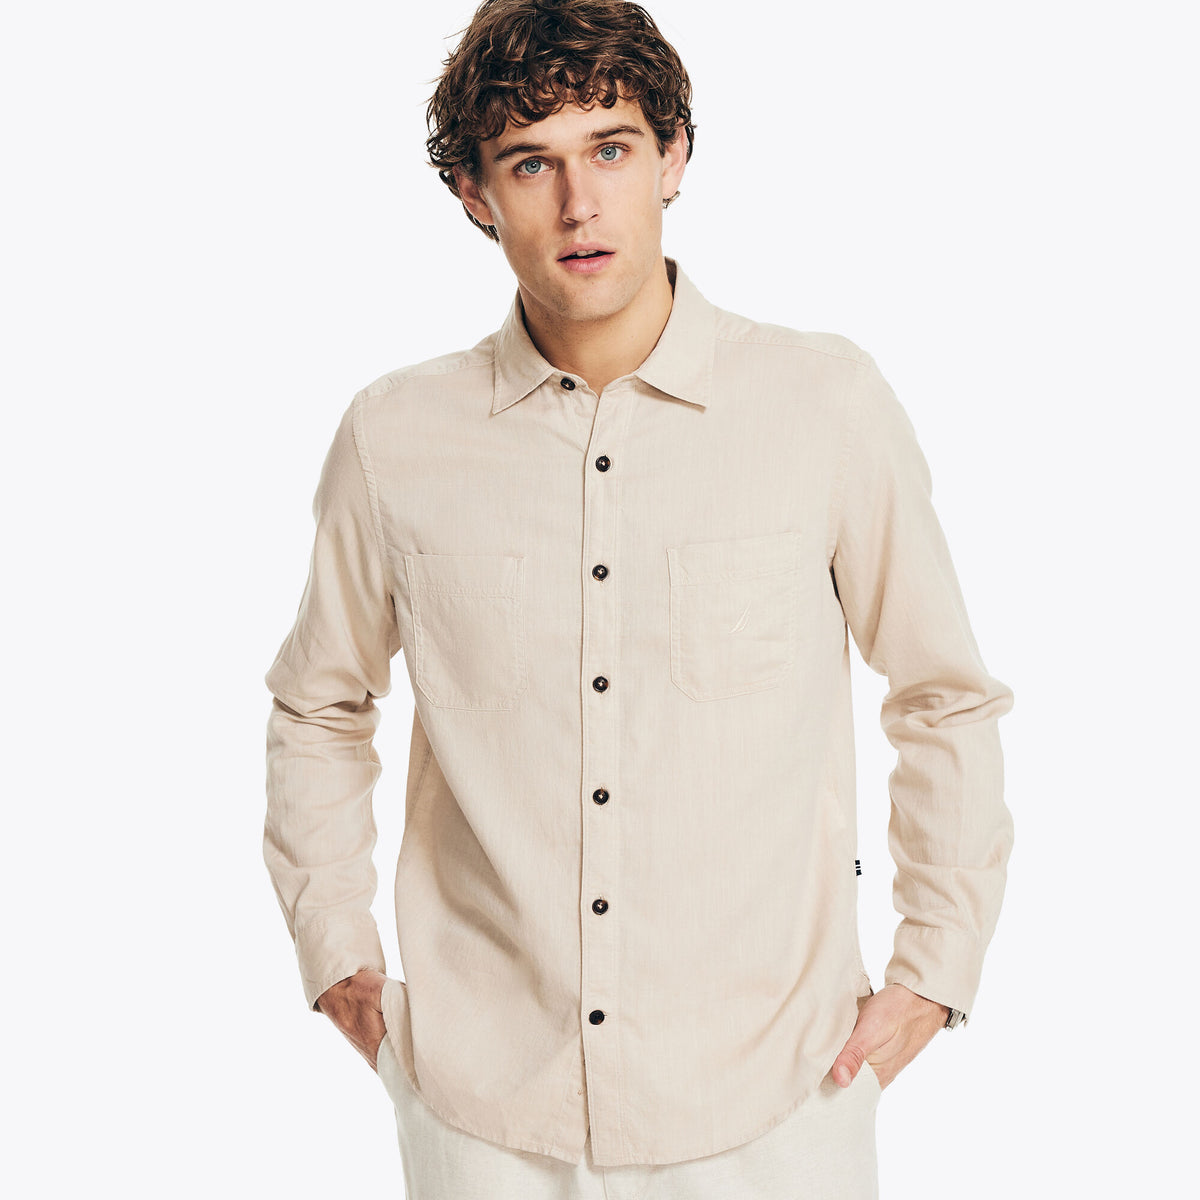 Nautica Men's Sustainably Crafted Solid Shirt Military Tan